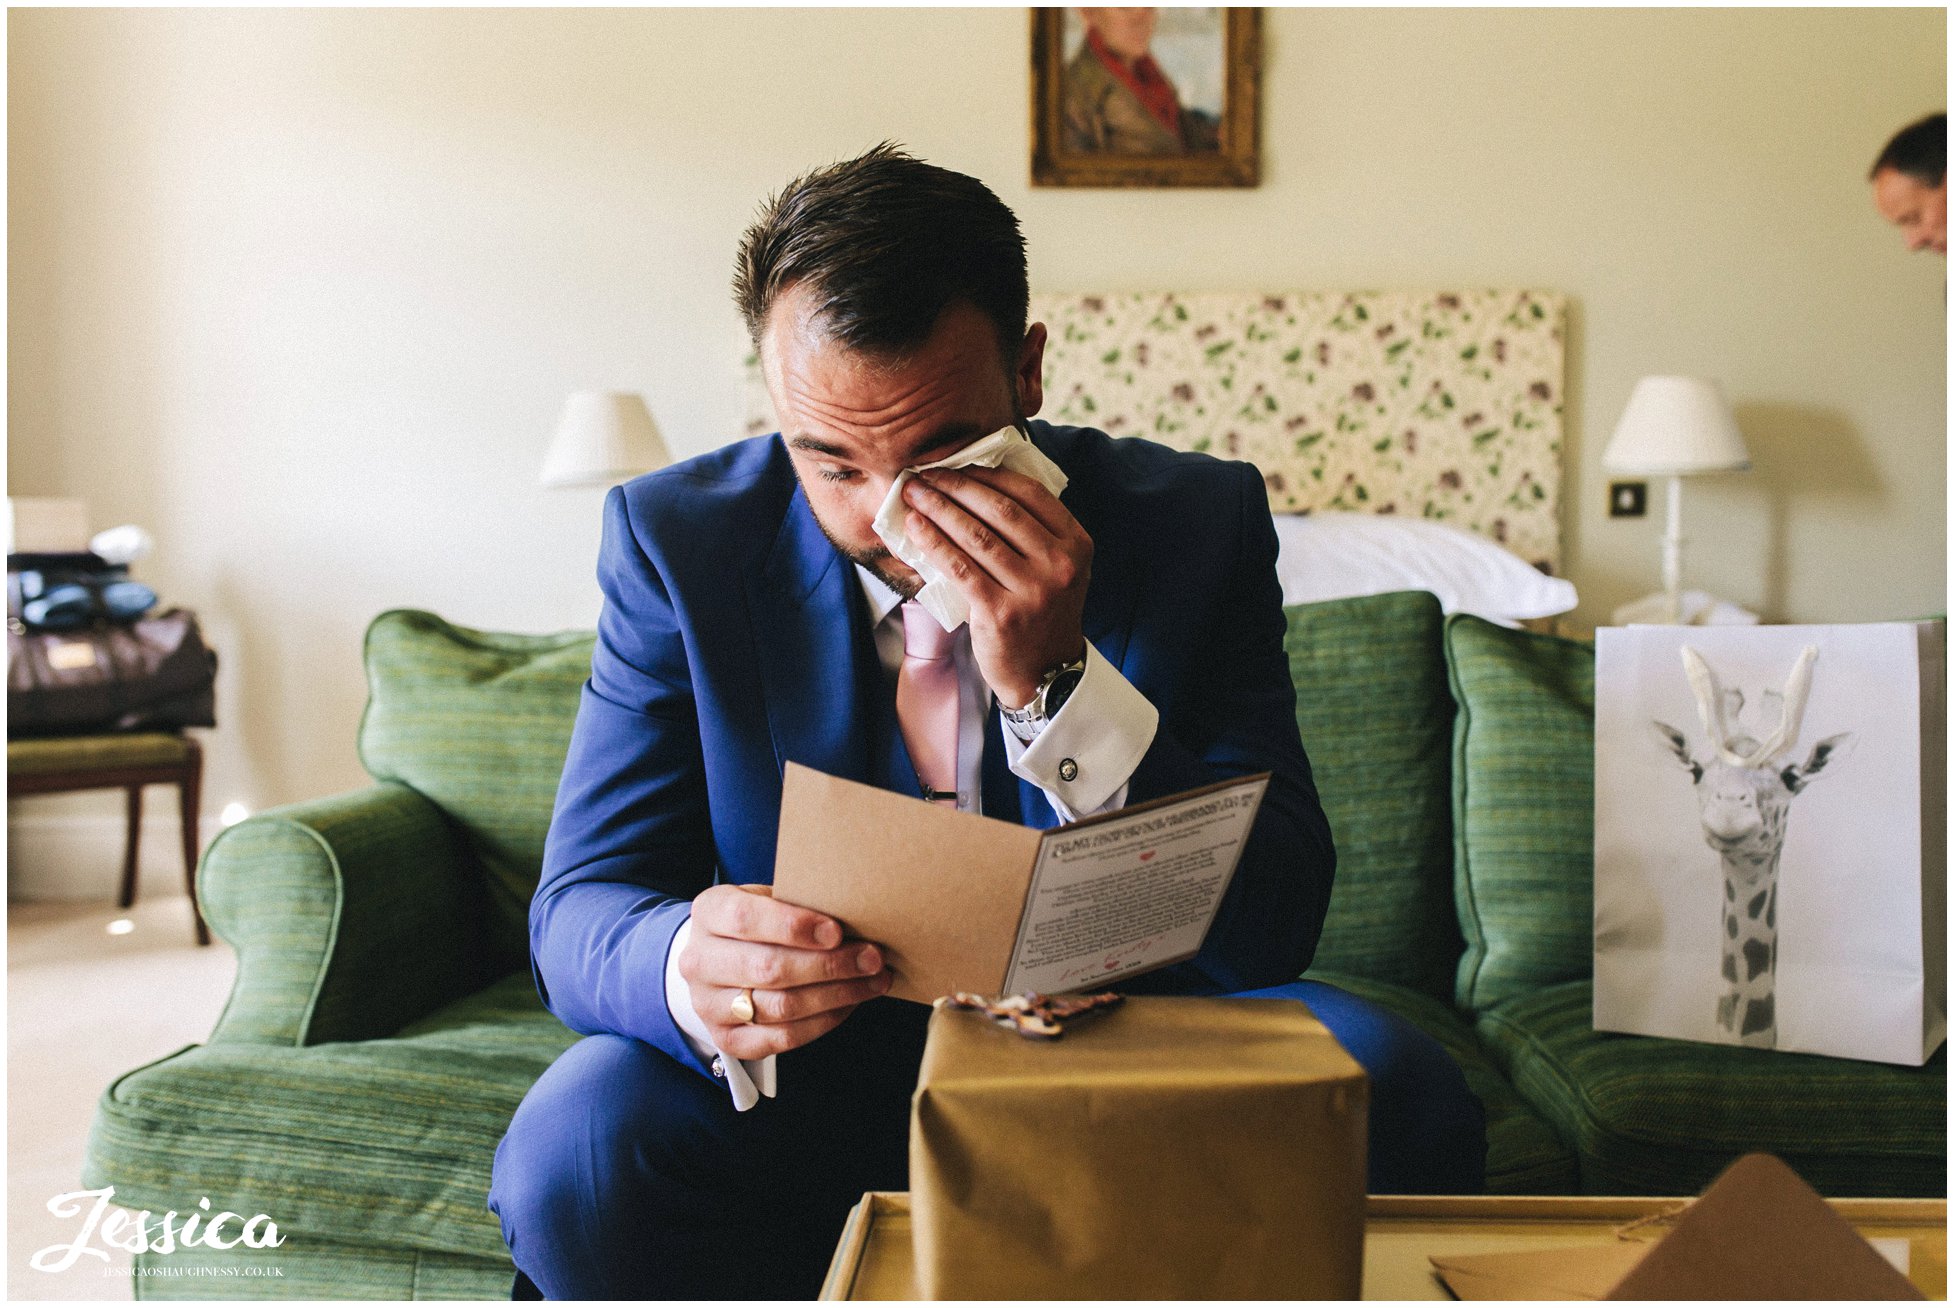 the groom cries as he reads a note from the bride